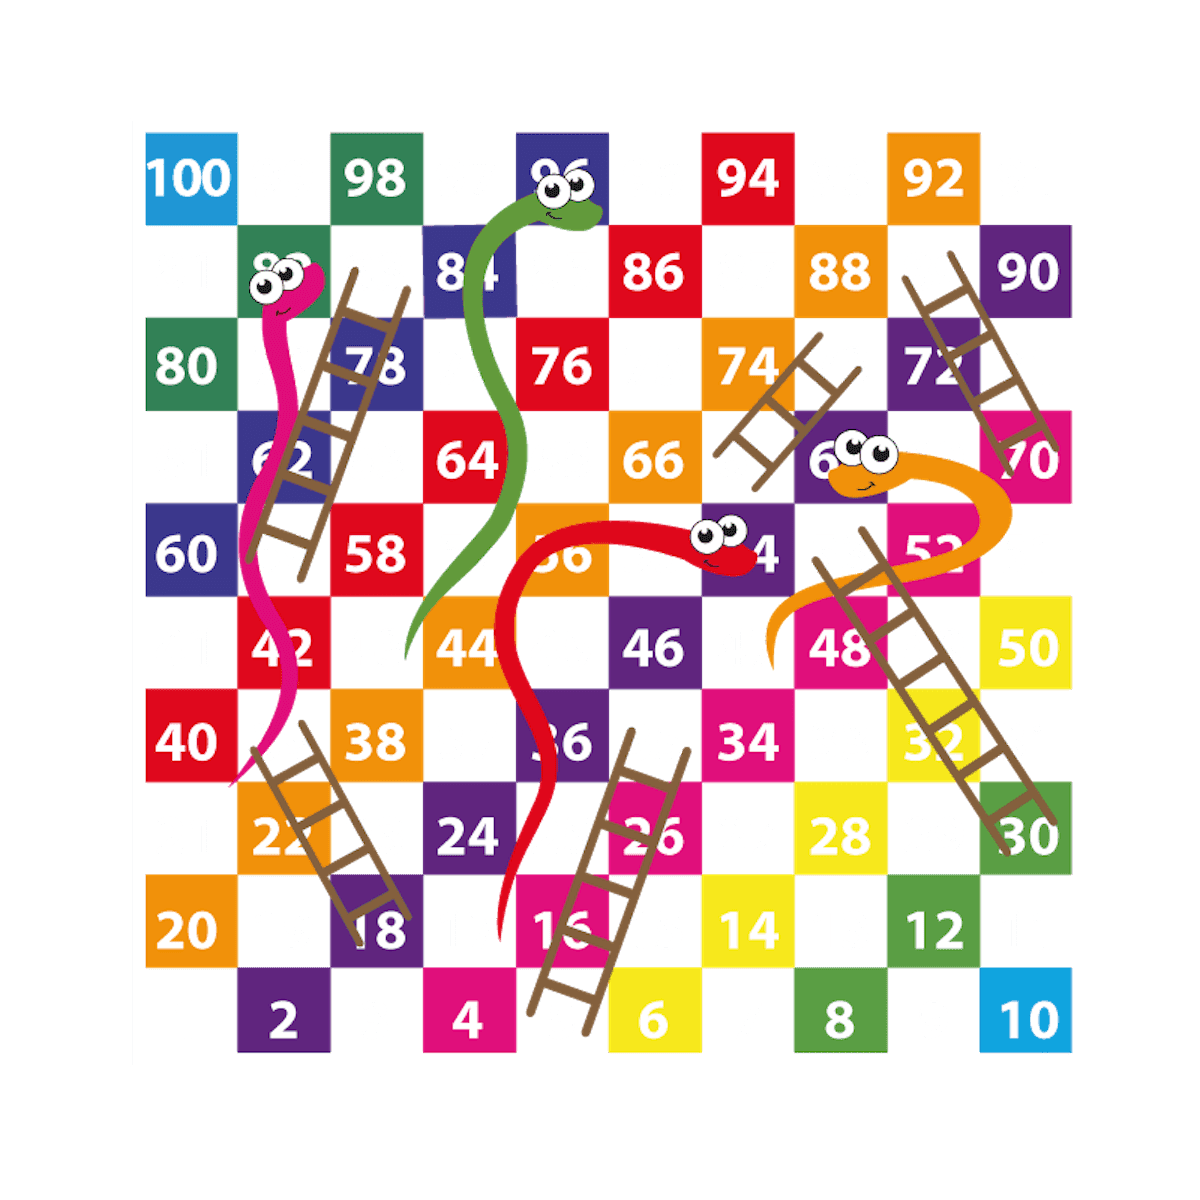 Playground-Marking-Snakes-and-Ladders-1-100-Every-Other